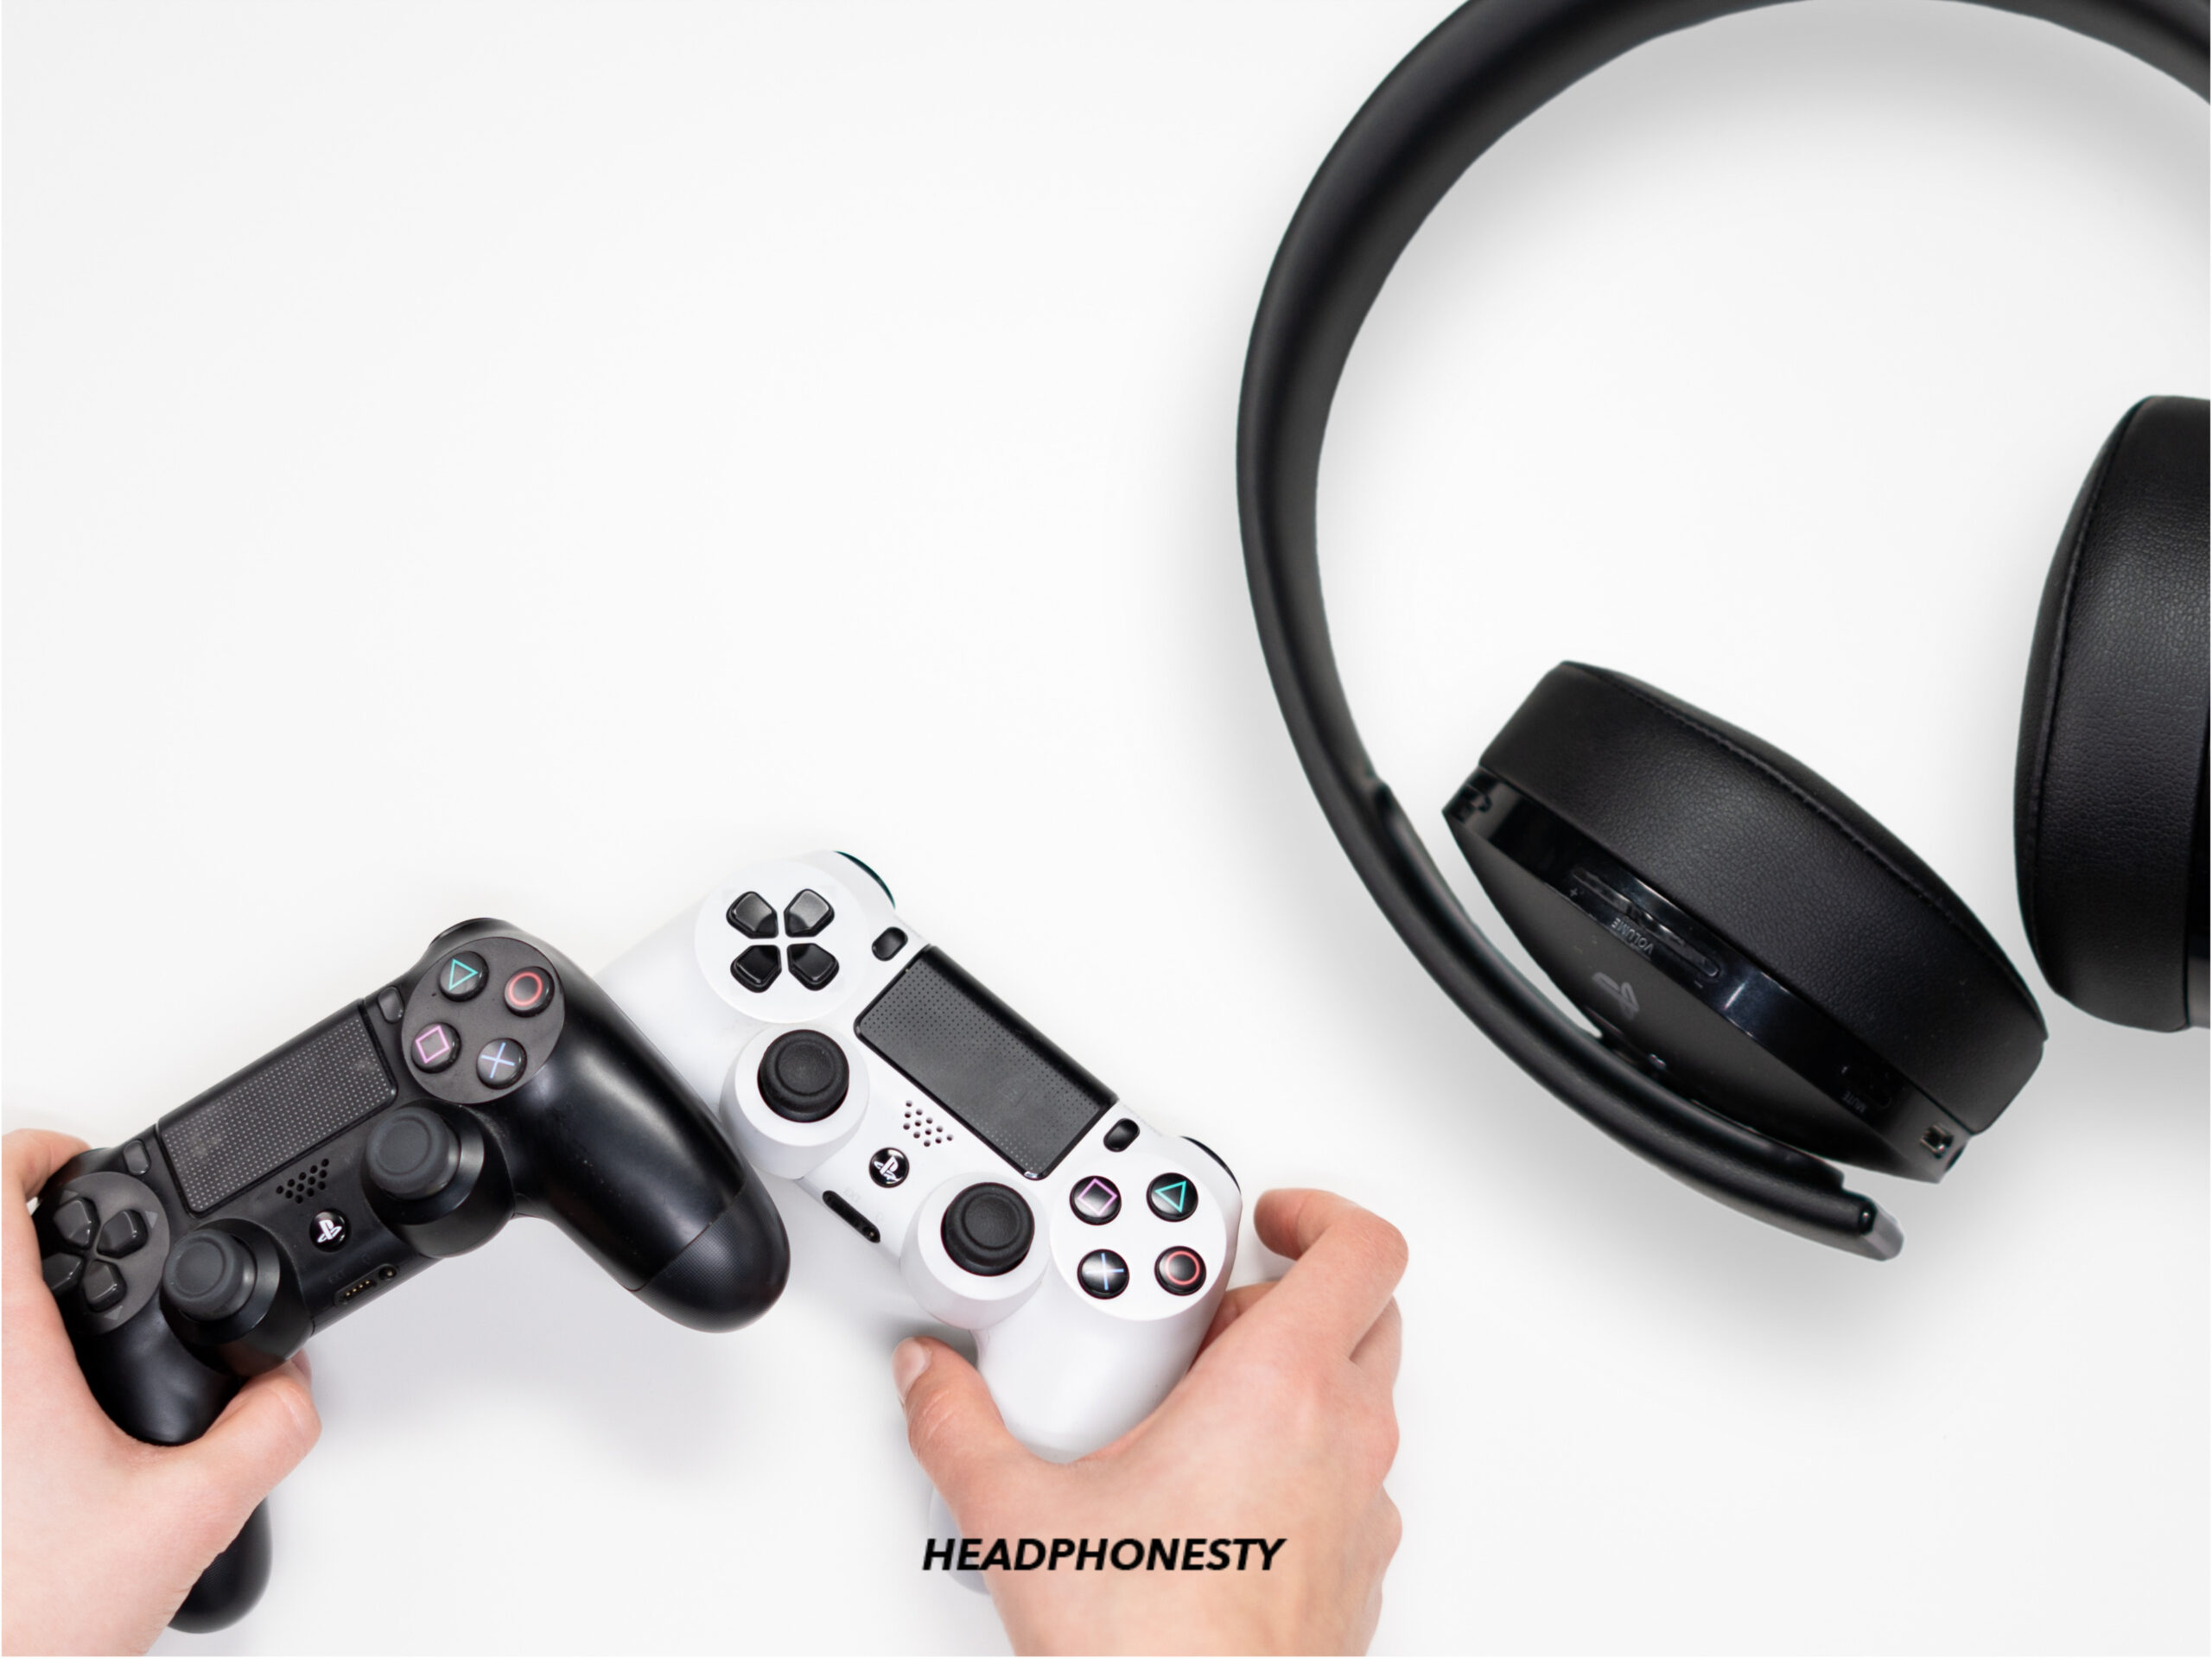 How to connect any type of headphones to the PS4 